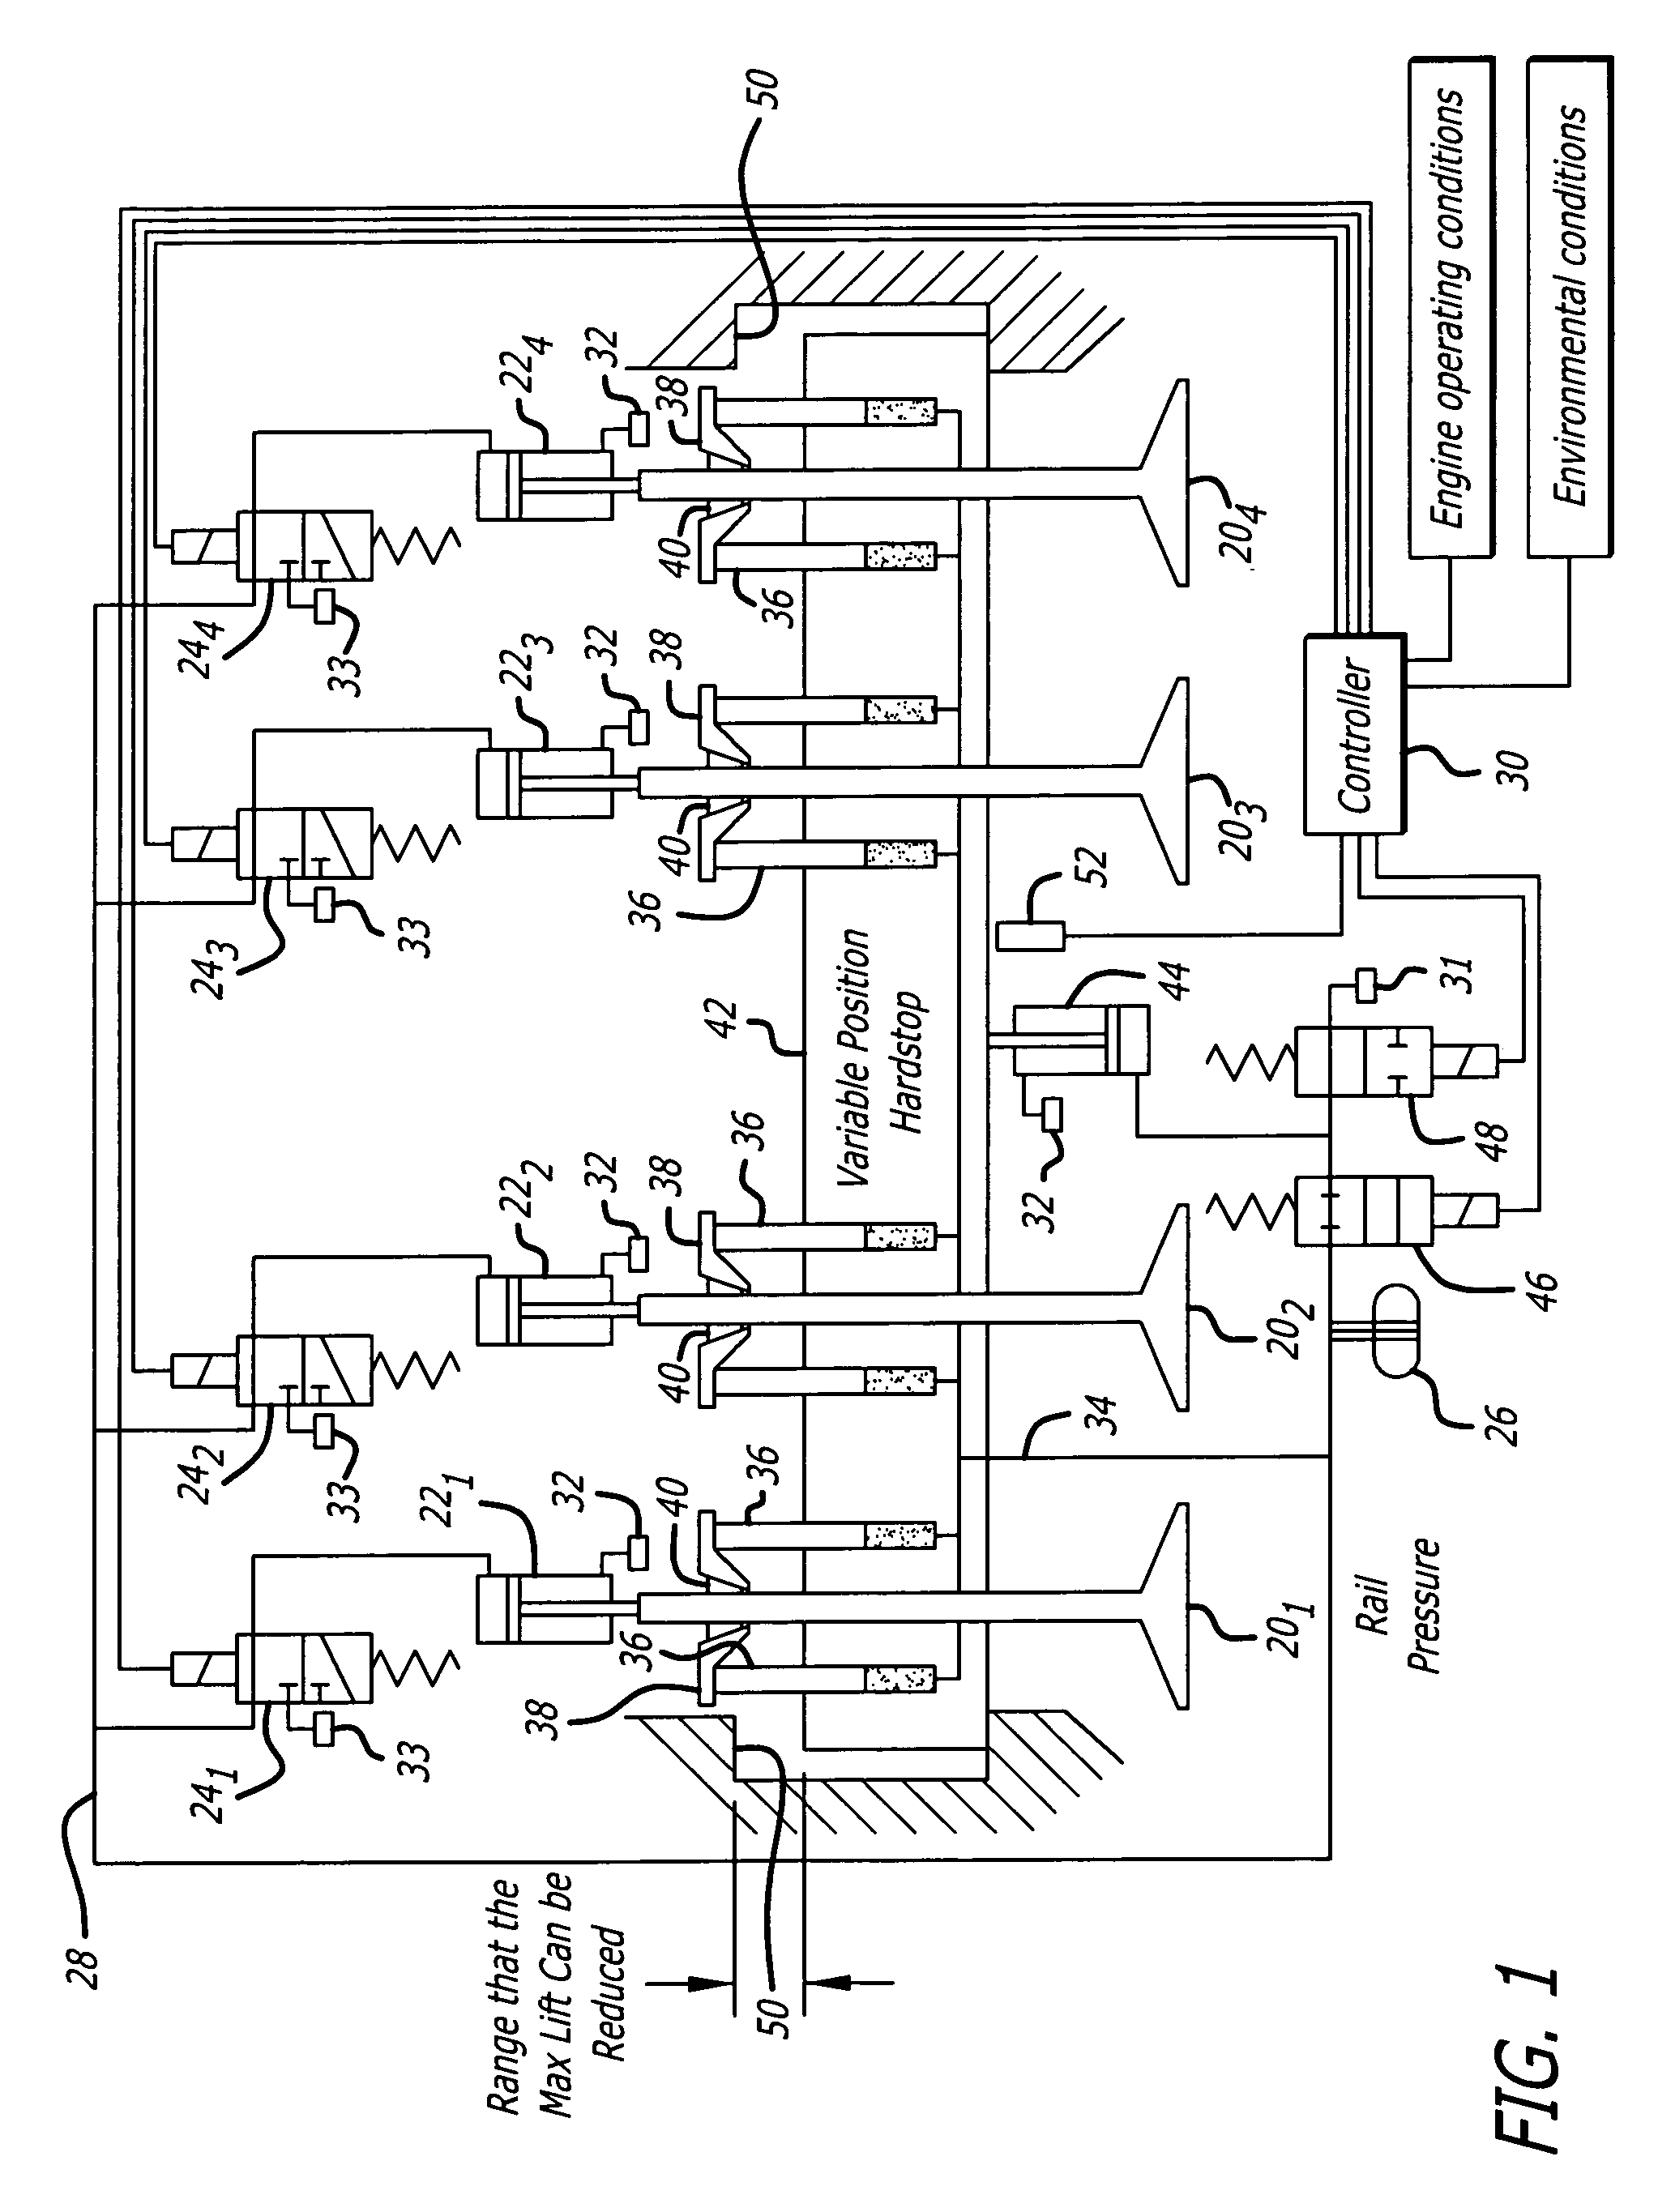 Hydraulic valve actuation systems and methods to provide variable lift for one or more engine air valves